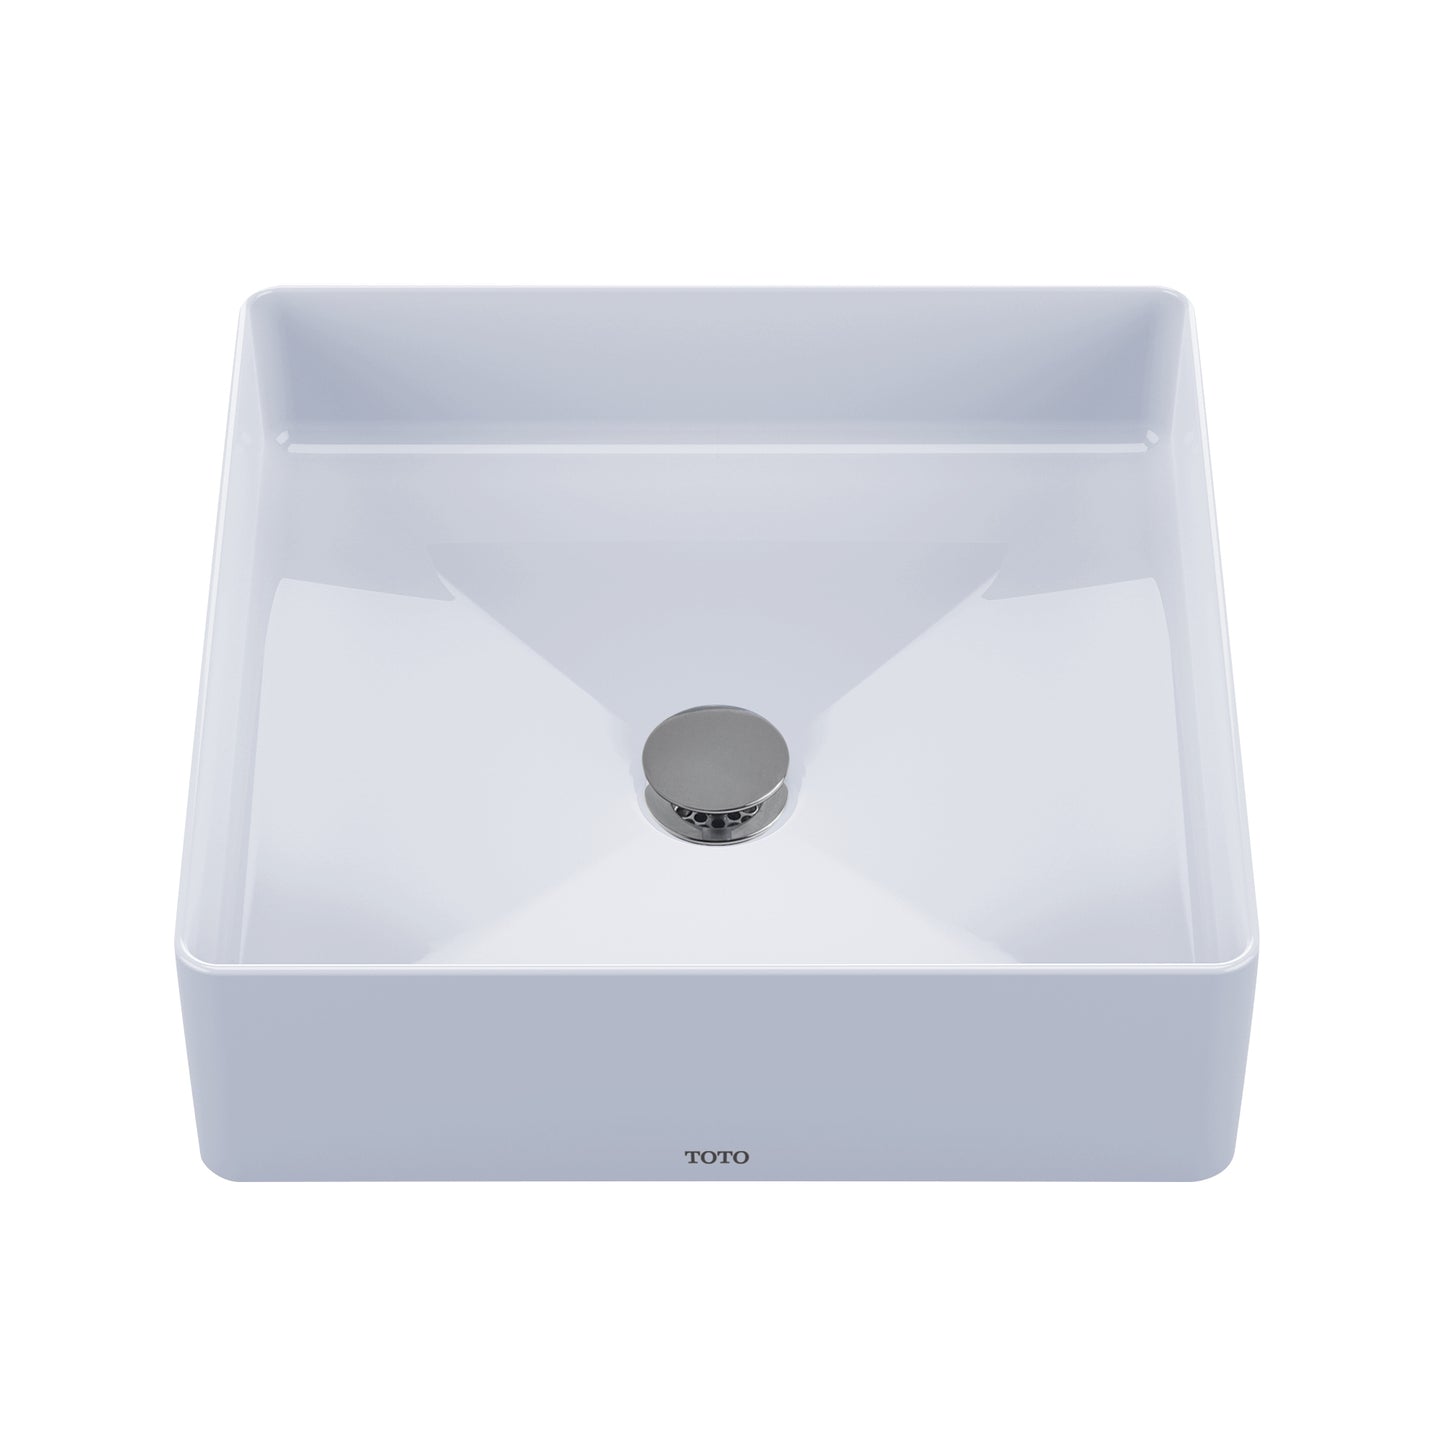 Toto LT574#01 - Arvina 16 5/8" Fireclay Square Vessel Lavatory Sink- Cotton